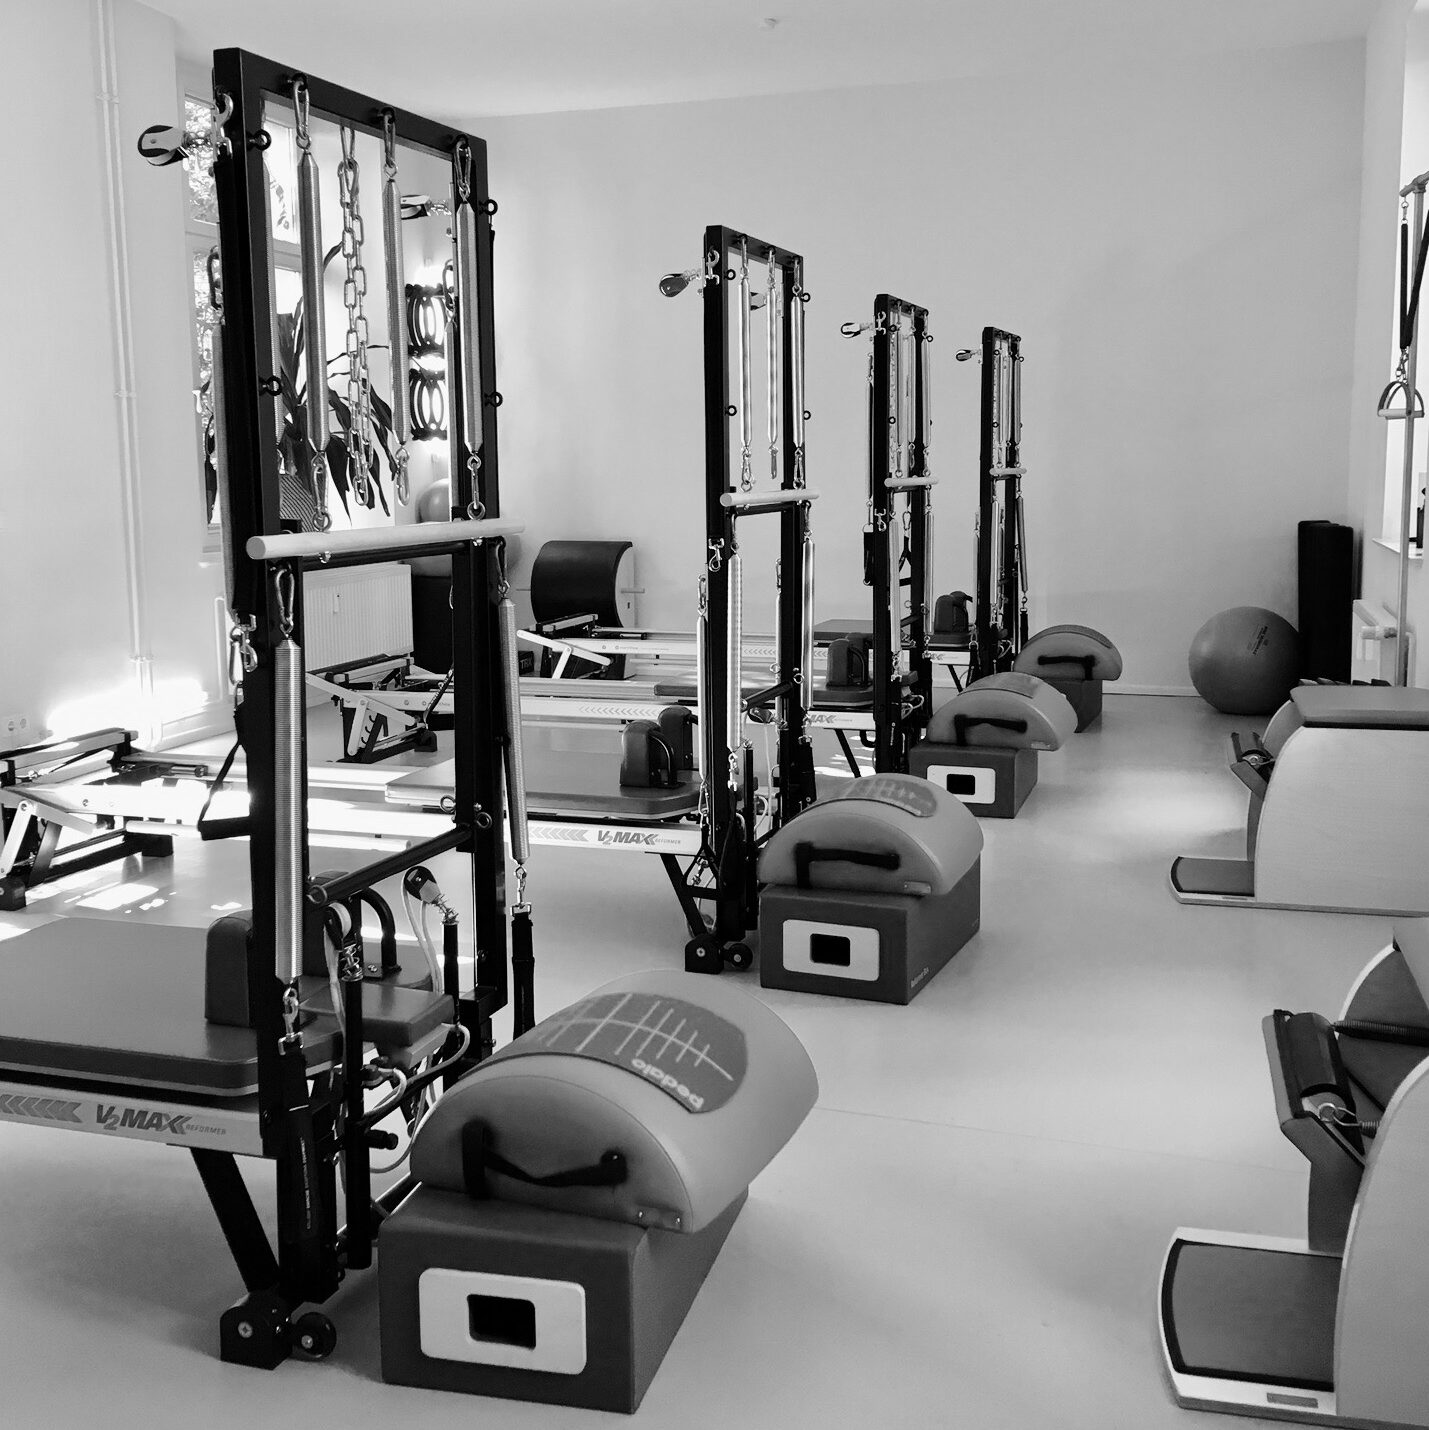 Pilates equipment studio equipped with Pilates Tower Unit Wall, Pilates Reformer, Pilates Chair equipment